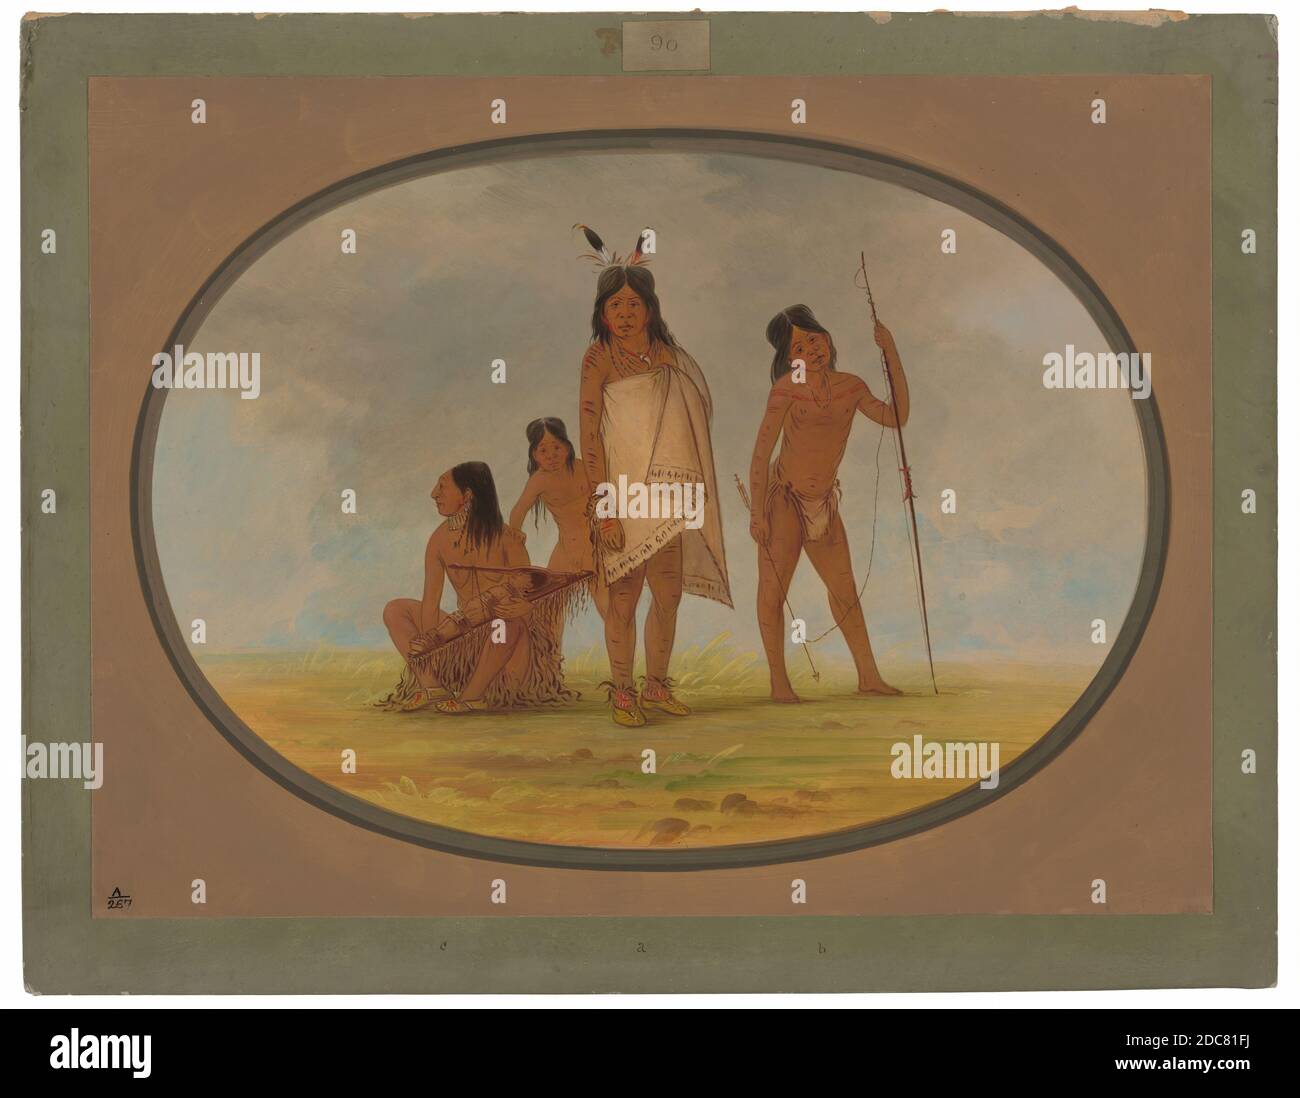 George Catlin, (artist), American, 1796 - 1872, Four Flathead Indians, 1855/1869, oil on card mounted on paperboard, overall: 47 x 62.8 cm (18 1/2 x 24 3/4 in Stock Photo